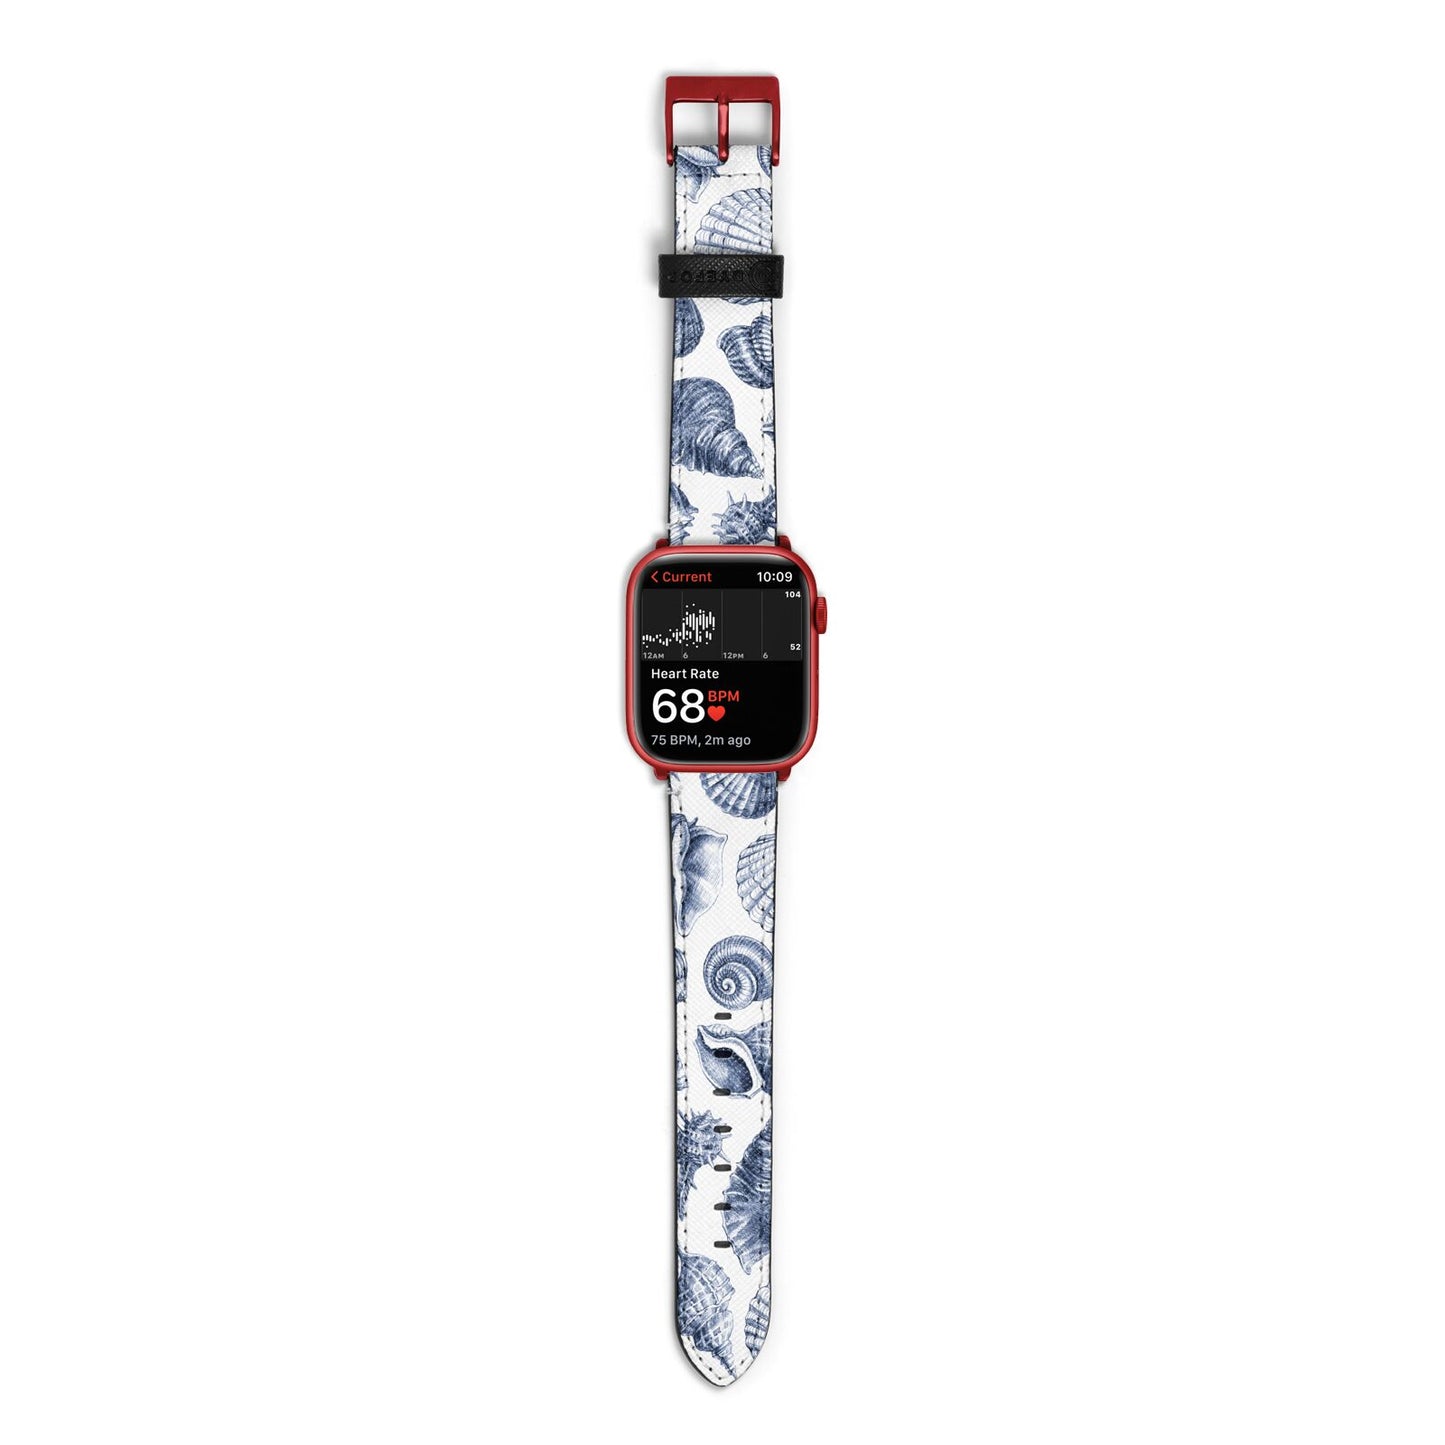 Shell Apple Watch Strap Size 38mm with Red Hardware